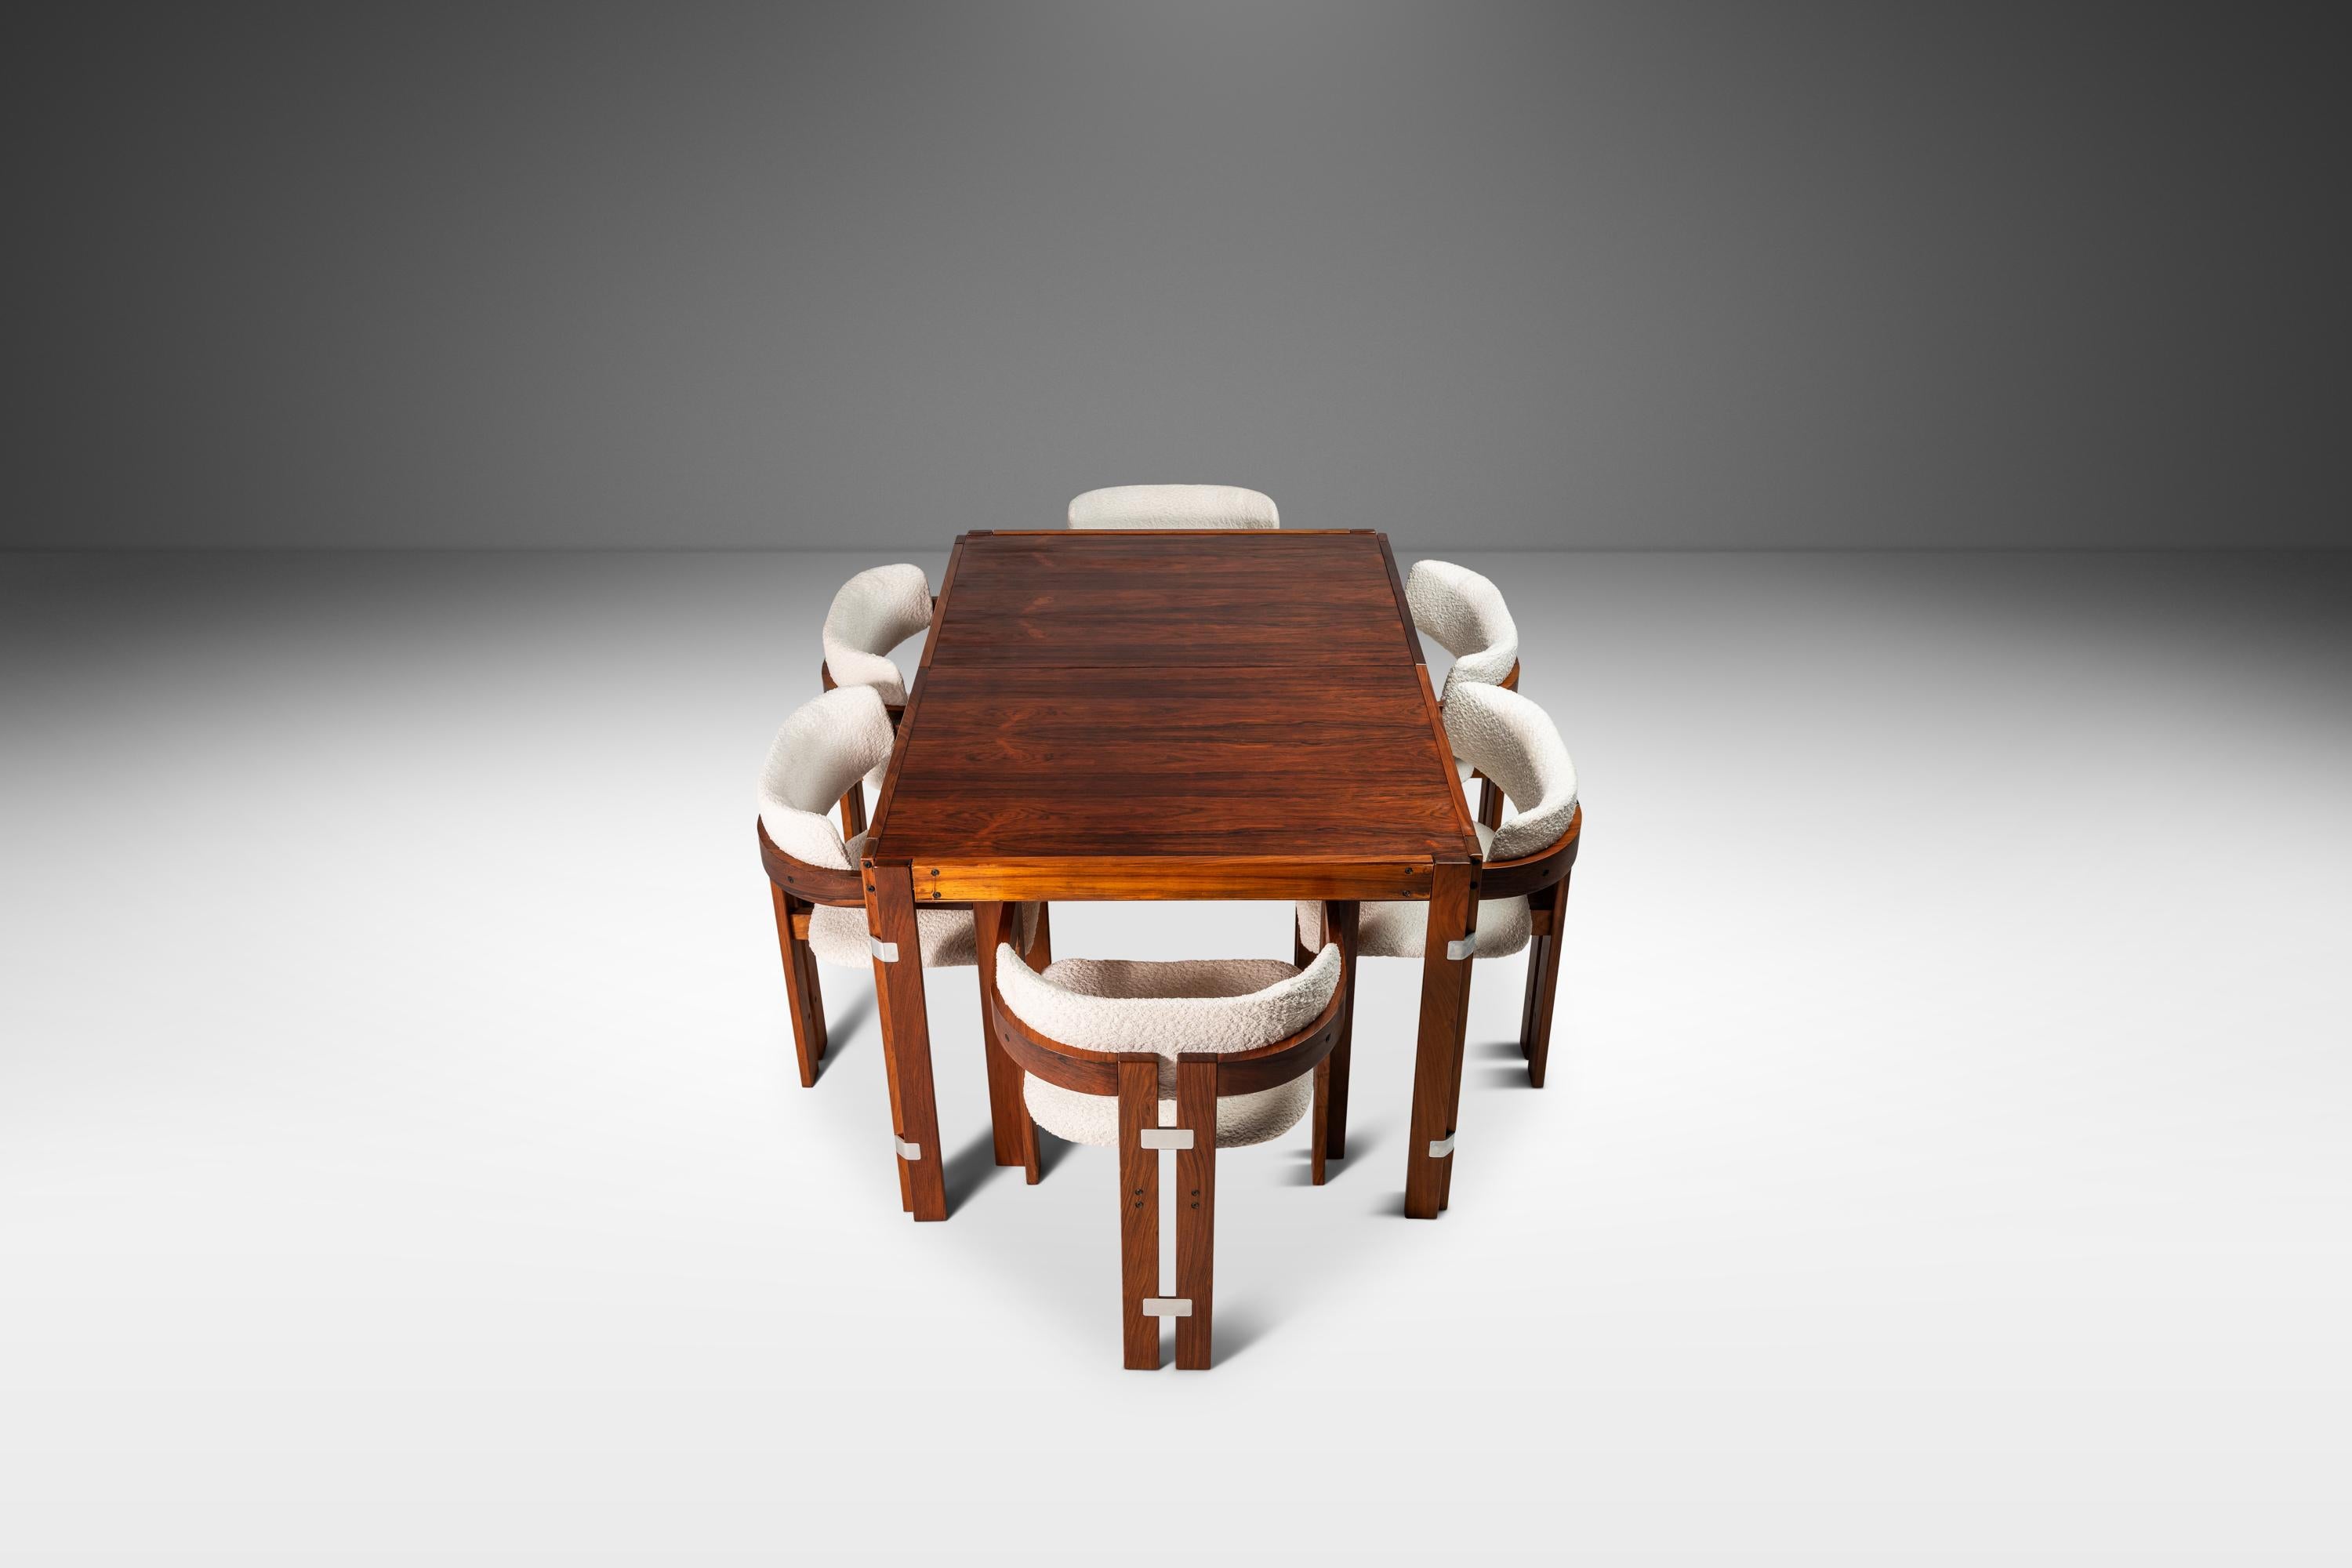 As functional as it is aesthetically breathtaking this extraordinary expansion dining table, constructed from Brazilian Rosewood, is in 100% original, vintage condition. Featuring a single expansion leaf that conveniently stows in the table,